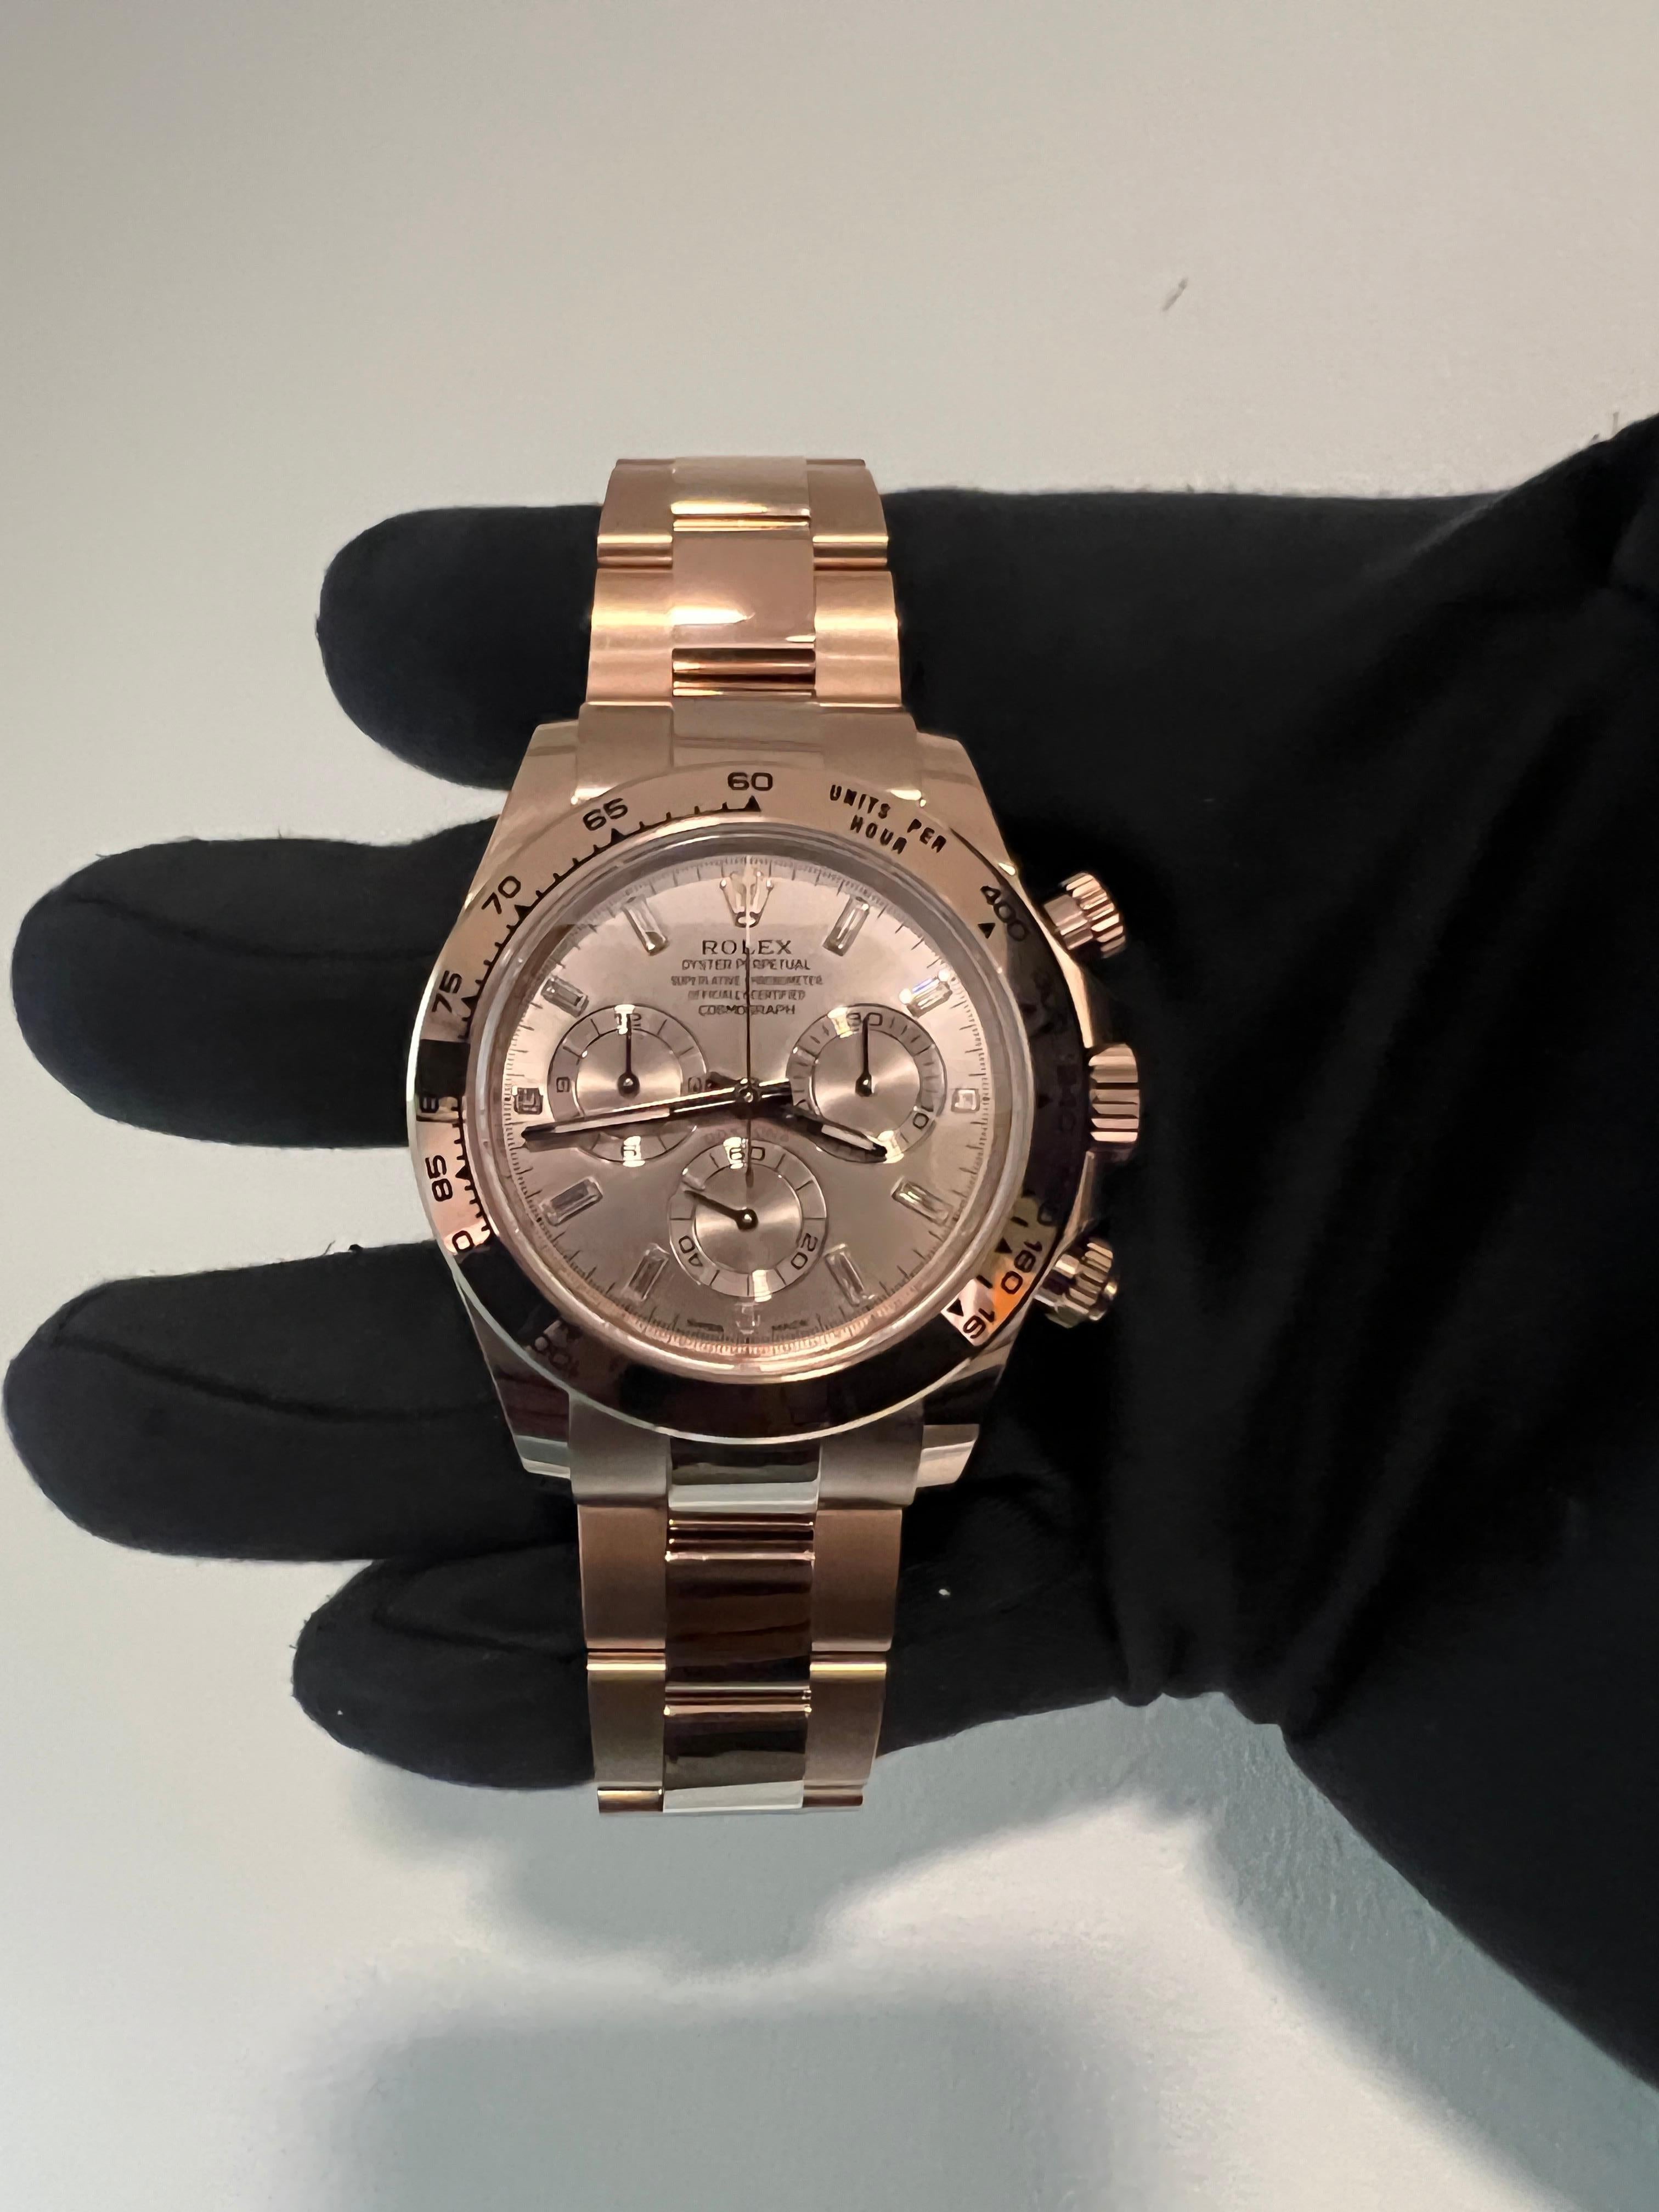 This Oyster Perpetual Cosmograph Daytona in 18 ct Everose gold, with a black and pink dial and an Oyster bracelet, features an 18 ct Everose gold bezel with engraved tachymetric scale.

This chronograph was designed to be the ultimate timing tool